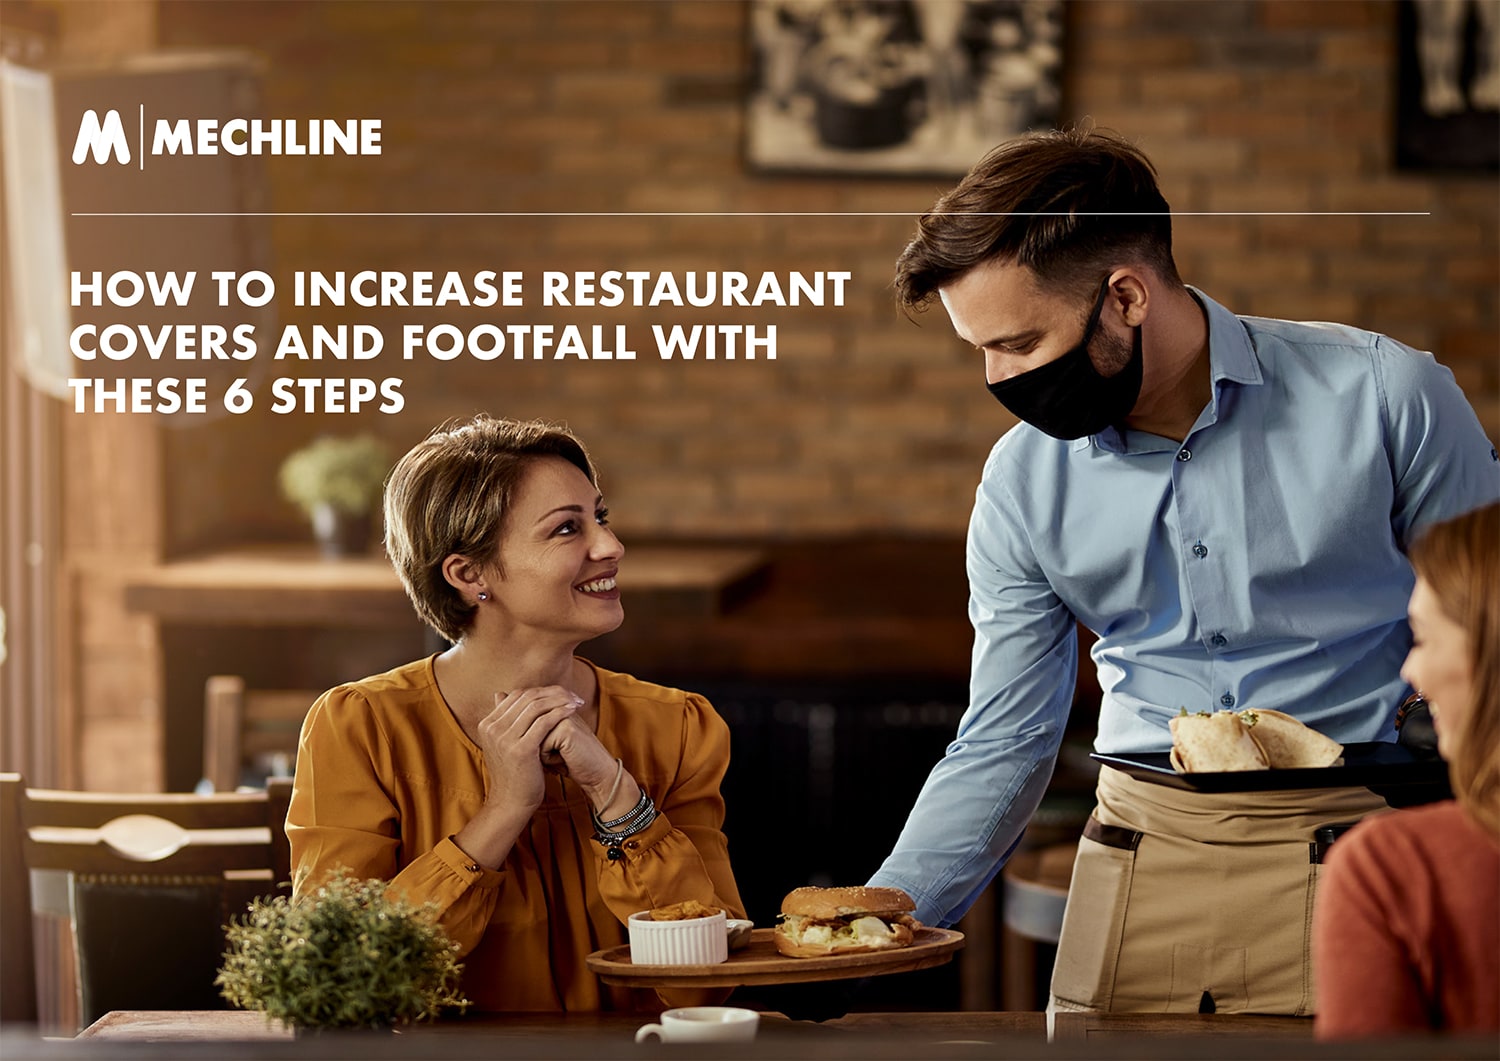 How to increase restaurant covers and footfall with these 6 steps-2 (1)